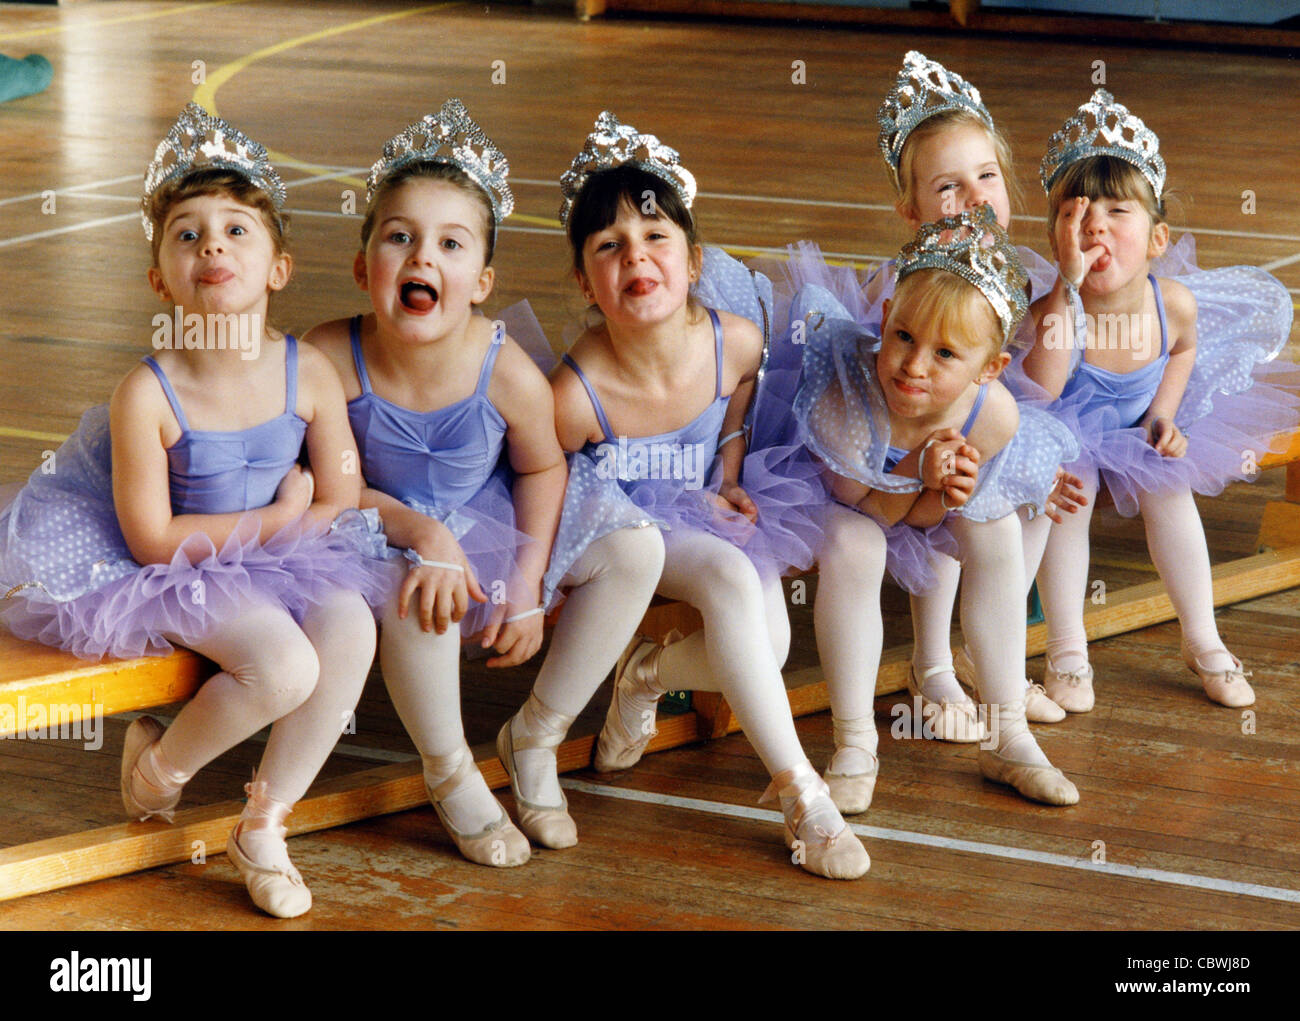 Cheeky young ballet dancers Stock Photo